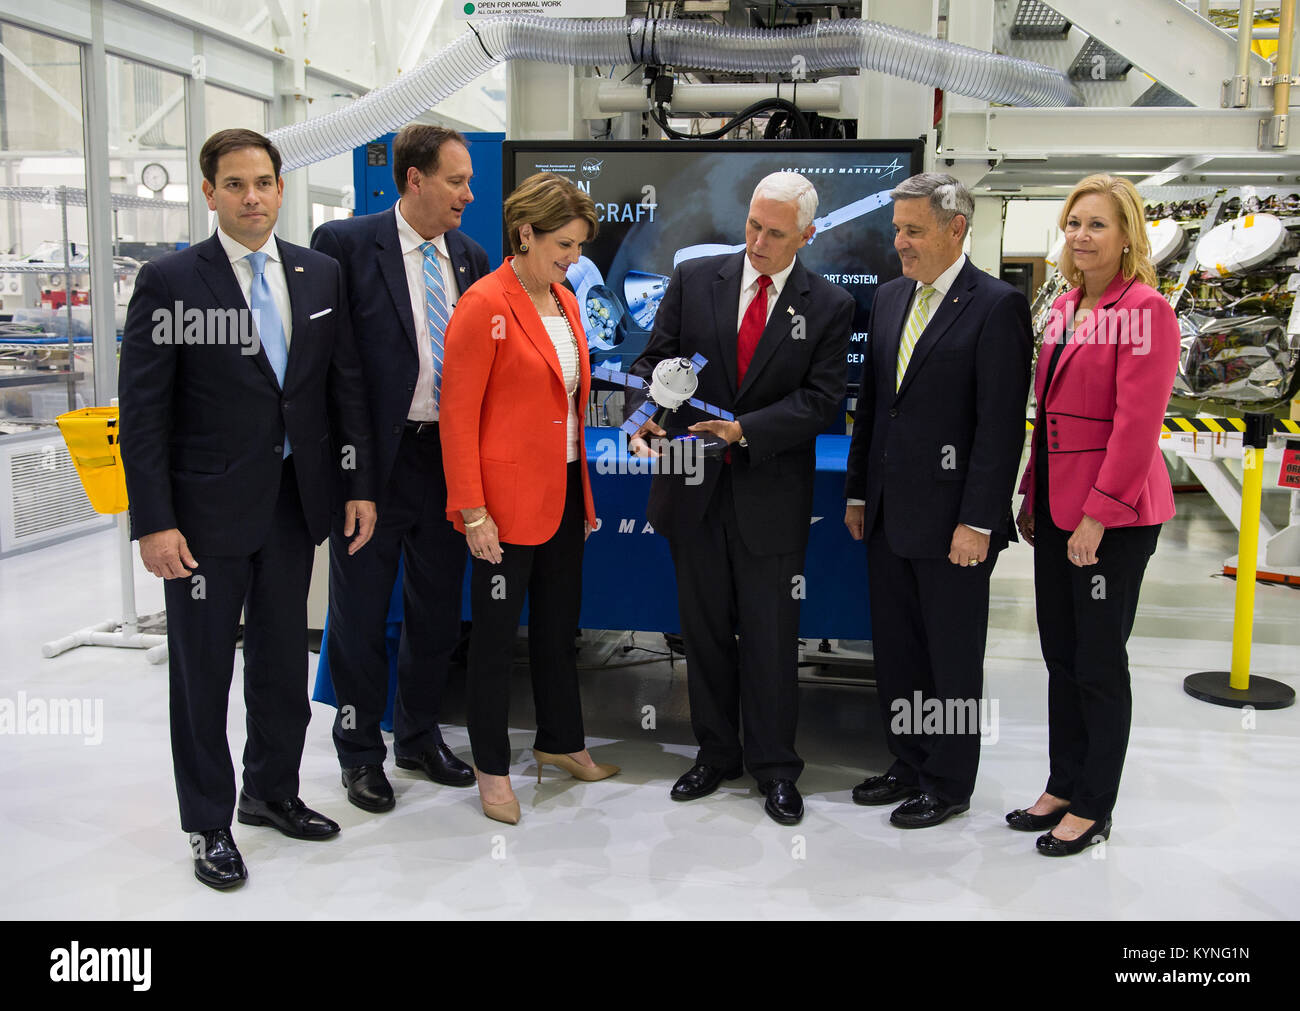 Vice President Mike Pence receives a model of Orion from Acting NASA Administrator Robert Lightfoot, second from left, and NASA Kennedy Space Center (KSC) Director Robert D. Cabana, second from right, Thursday, July 6, 2017, while touring KSC's Operations and Checkout Building in Cape Canaveral, Florida. Also pictured are Sen. Marco Rubio, R-Fla., Marillyn Hewson, chairman, president and CEO of Lockheed Martin, third from left, and Janet Petro, KSC's deputy director, right. Photo Credit: (NASA/Aubrey Gemignani) Stock Photo